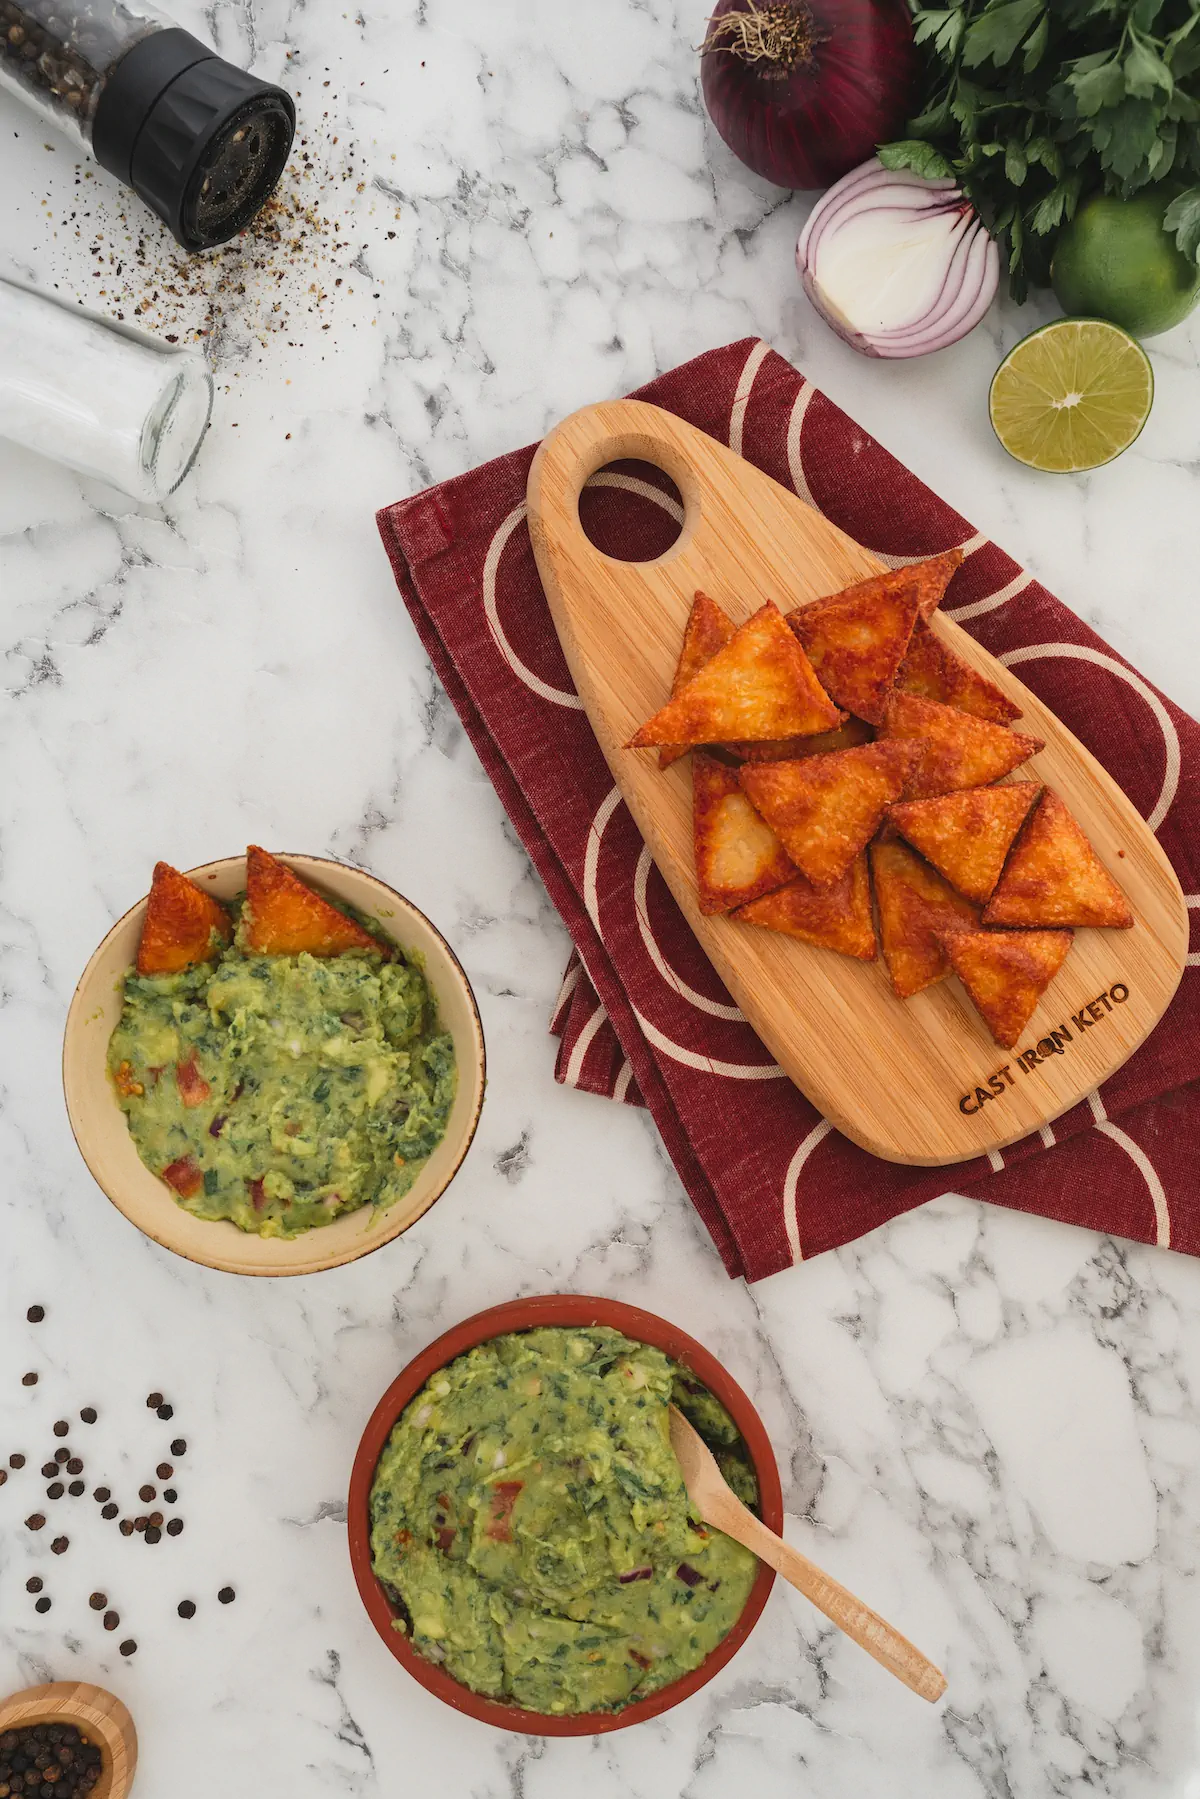 Keto tortilla chips on a wooden board next to two bowls of guacamole.